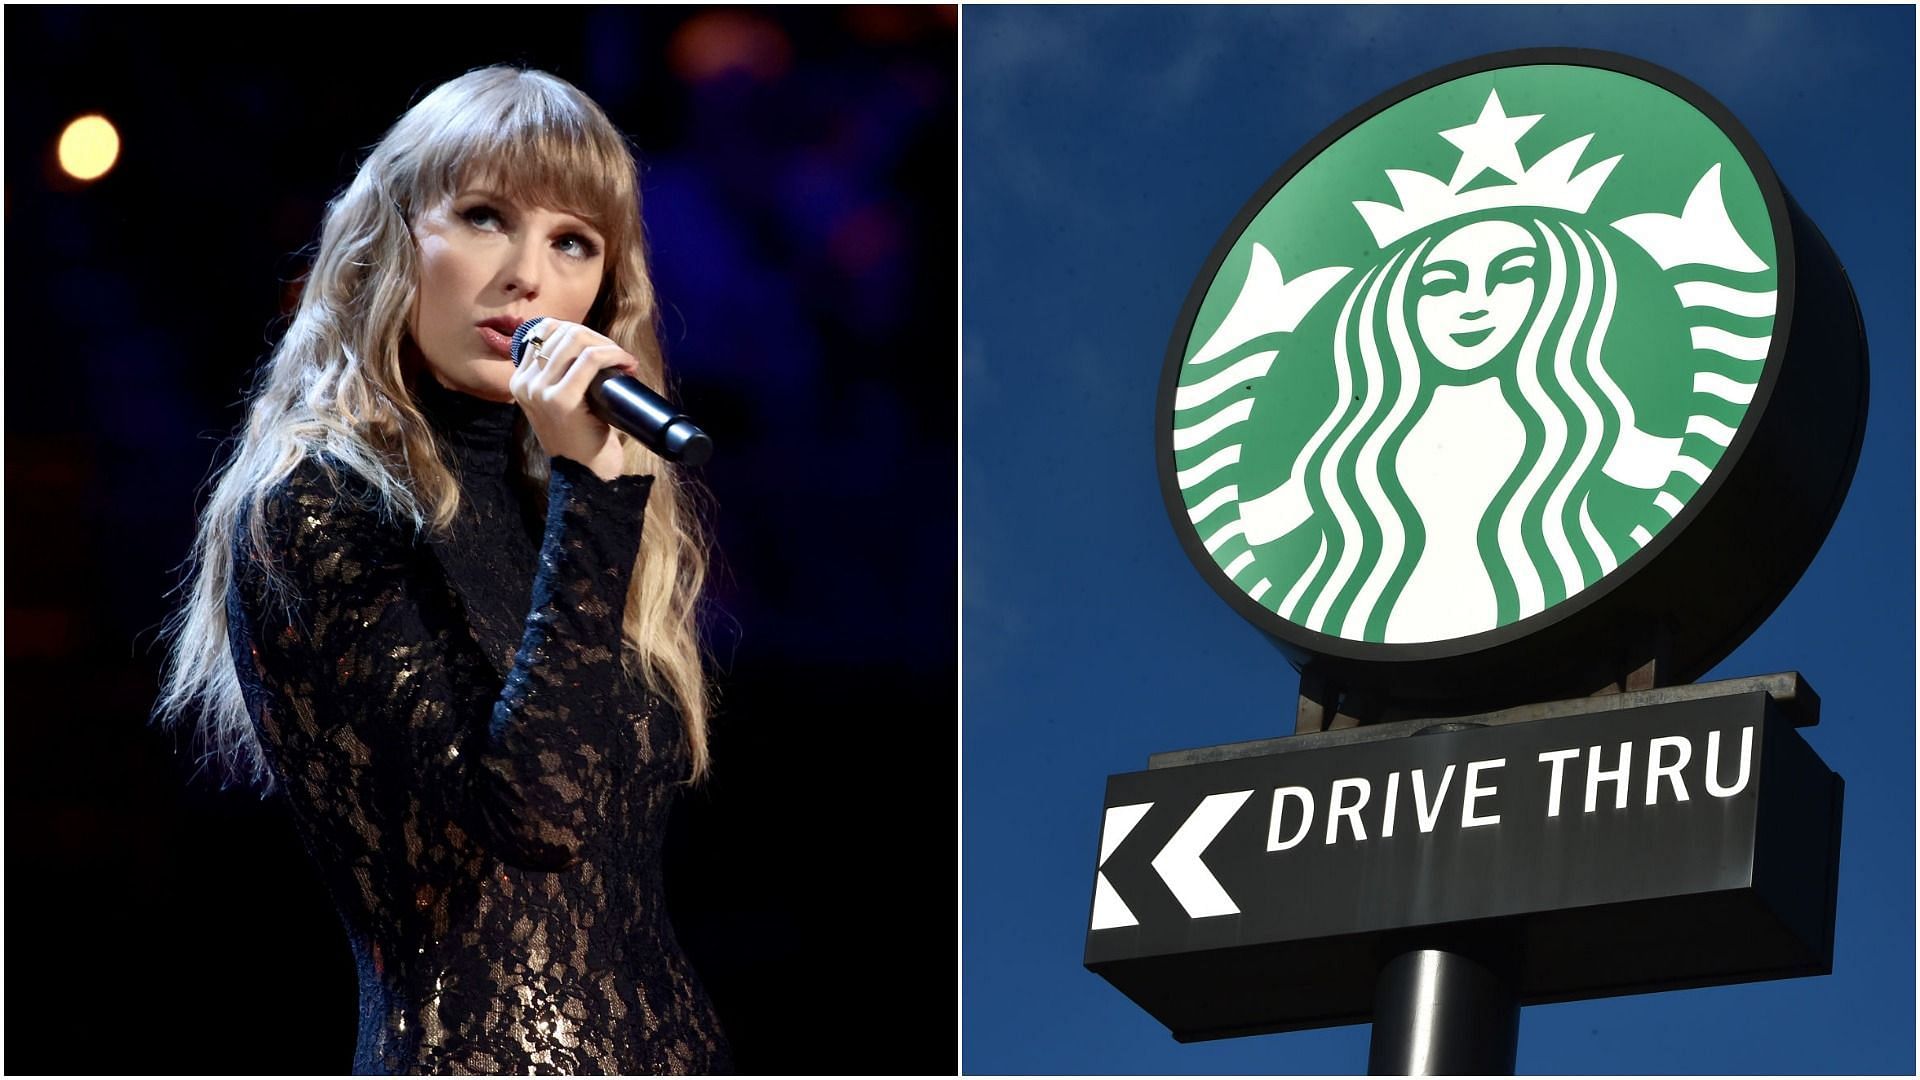 Taylor Swift and Starbucks have announced a holiday collaboration (Images via Getty Images)